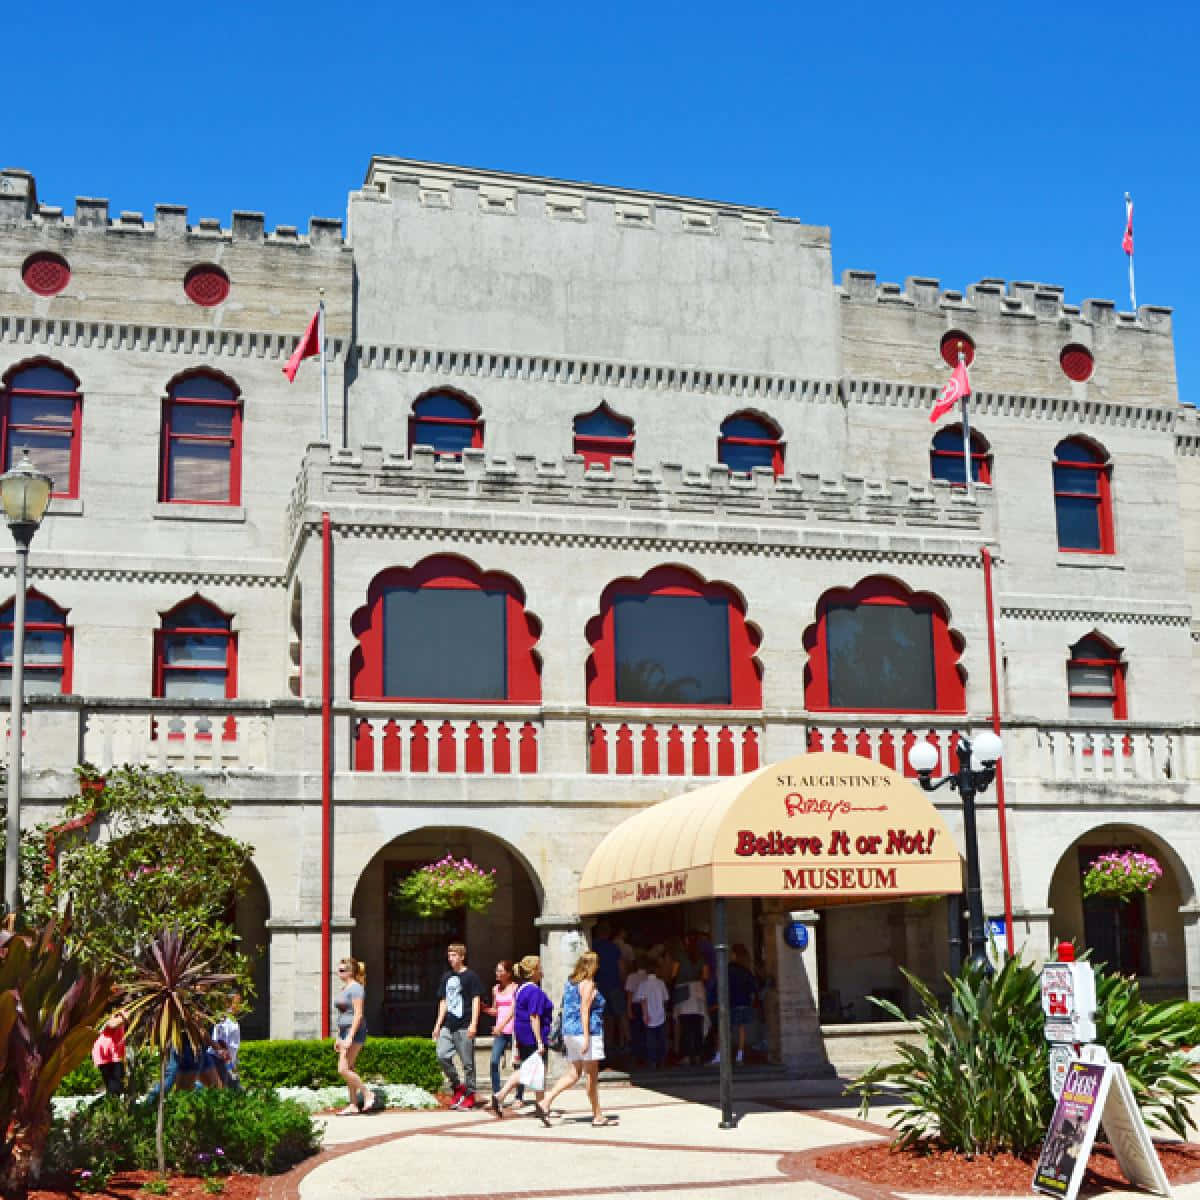 Spend a Relaxing Day in St Augustine, Florida